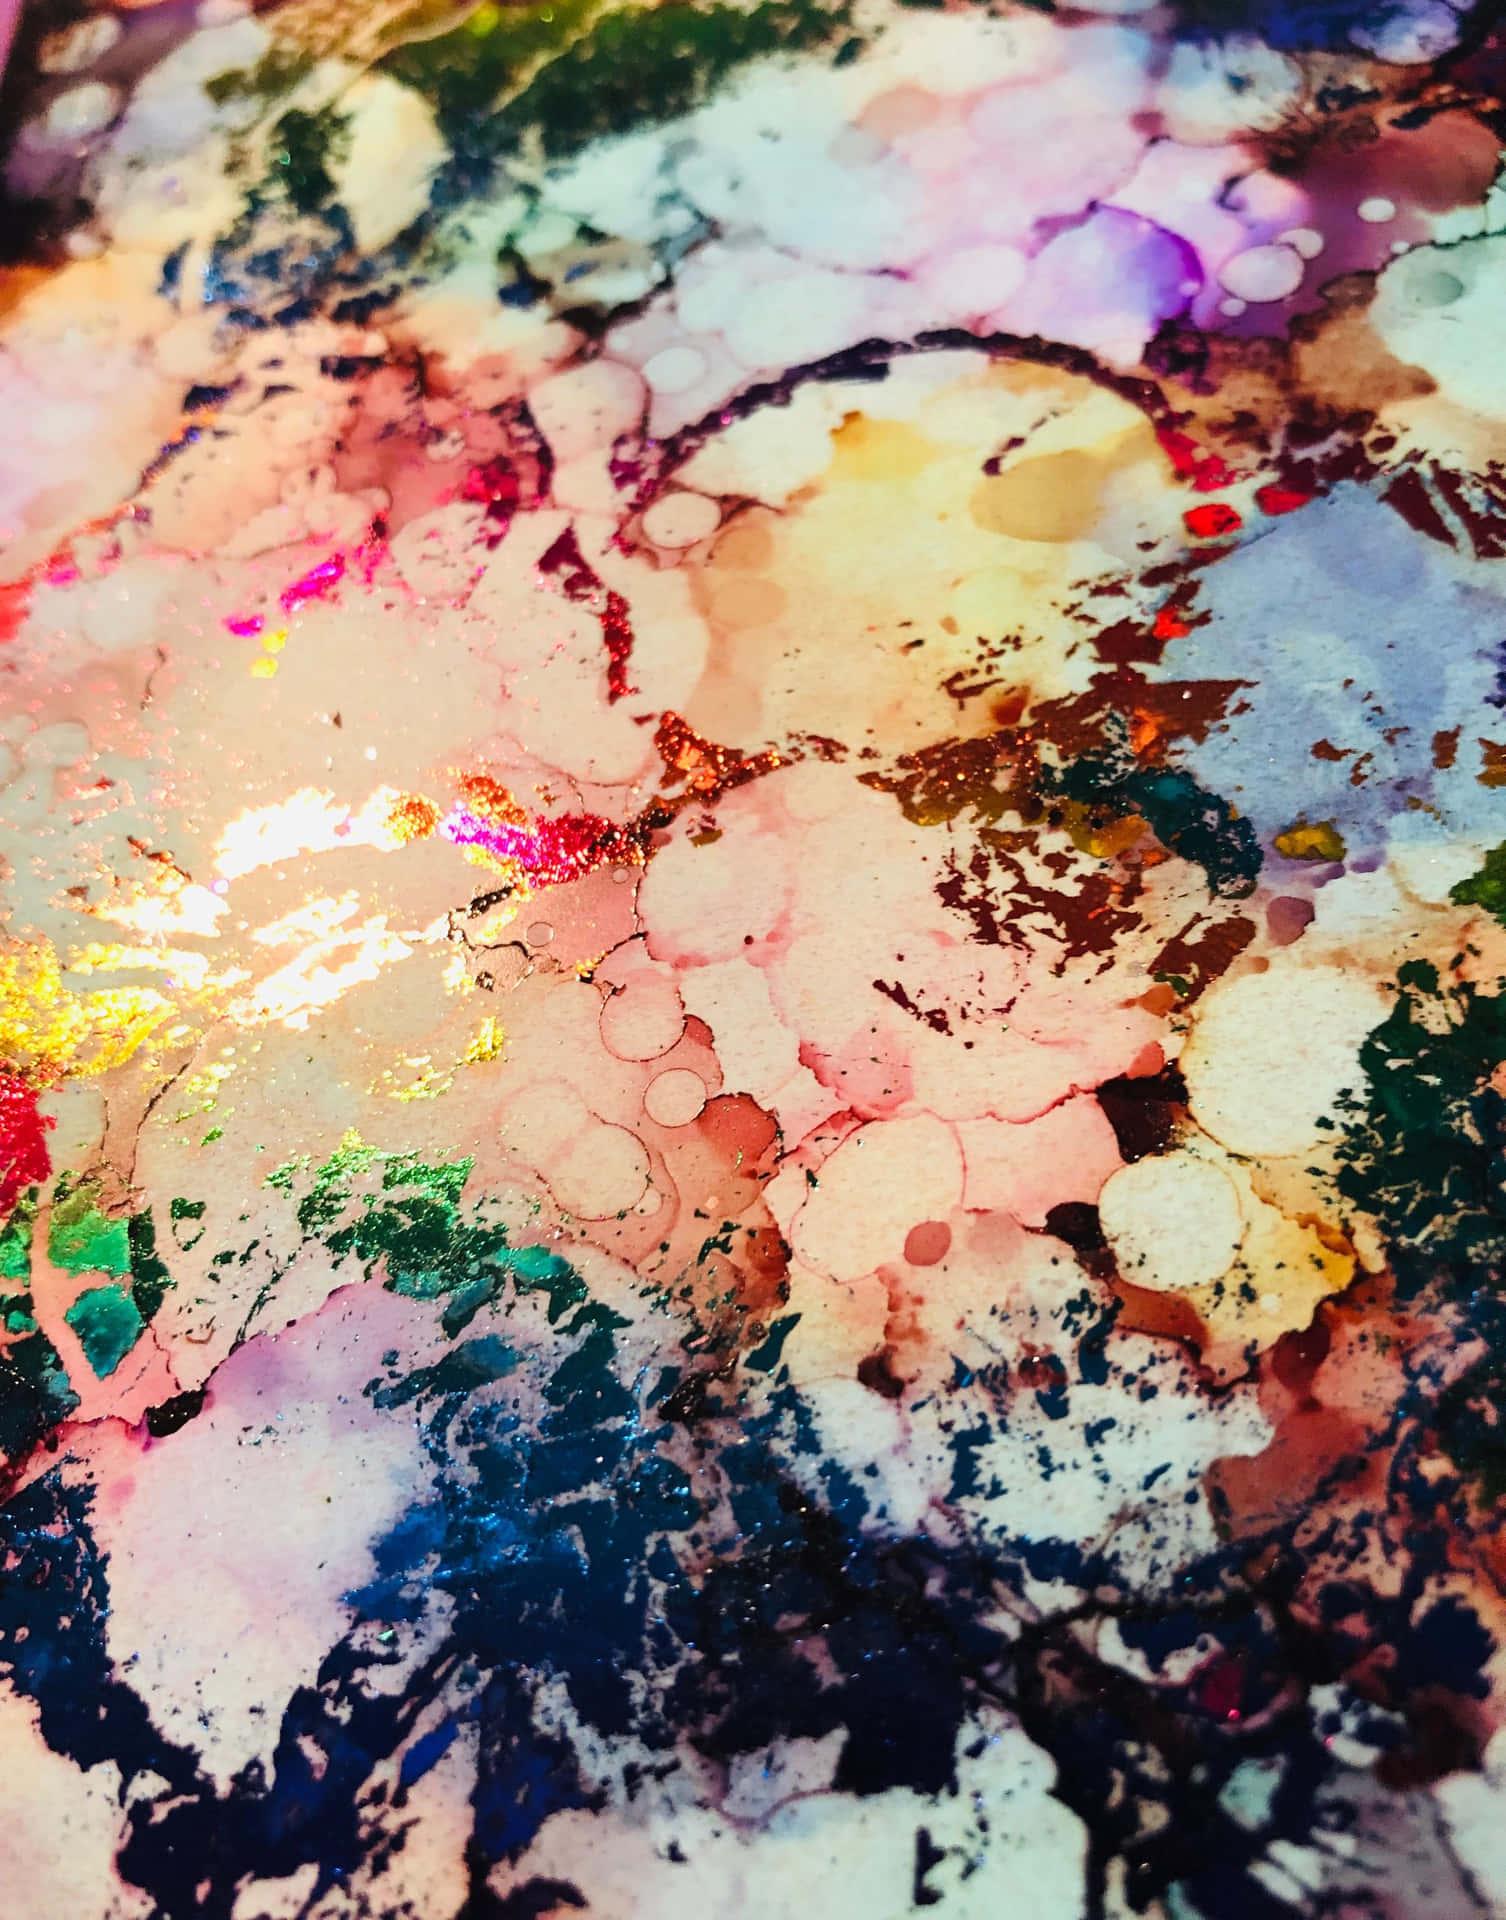 A Colorful Painting On A Table